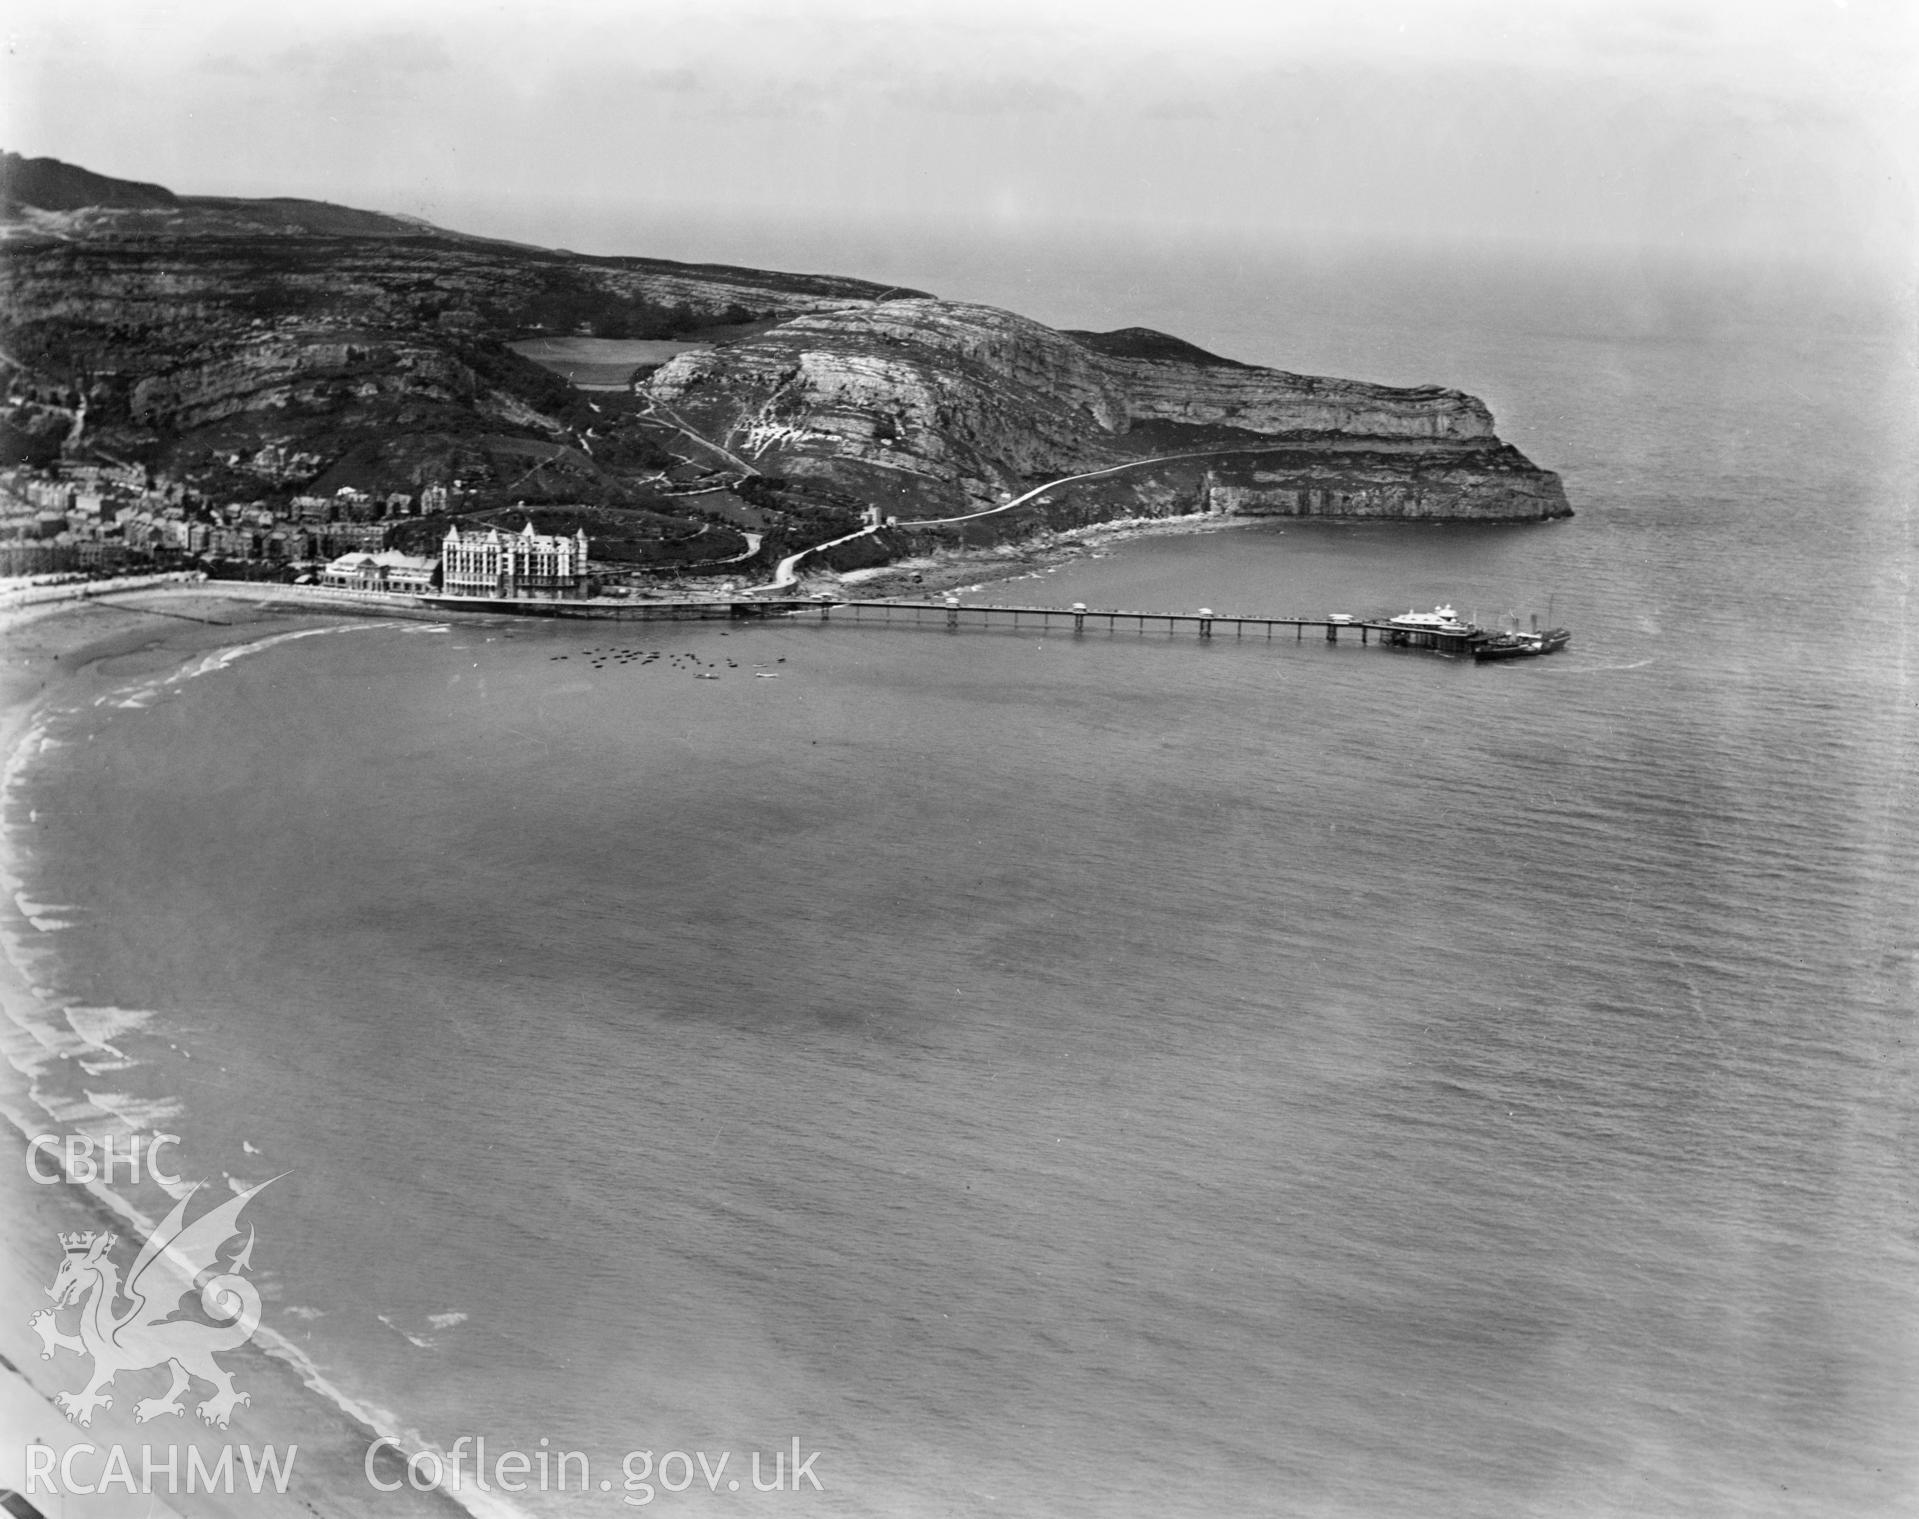 View of Llandudno showing pier, oblique aerial view. 5?x4? black and white glass plate negative.